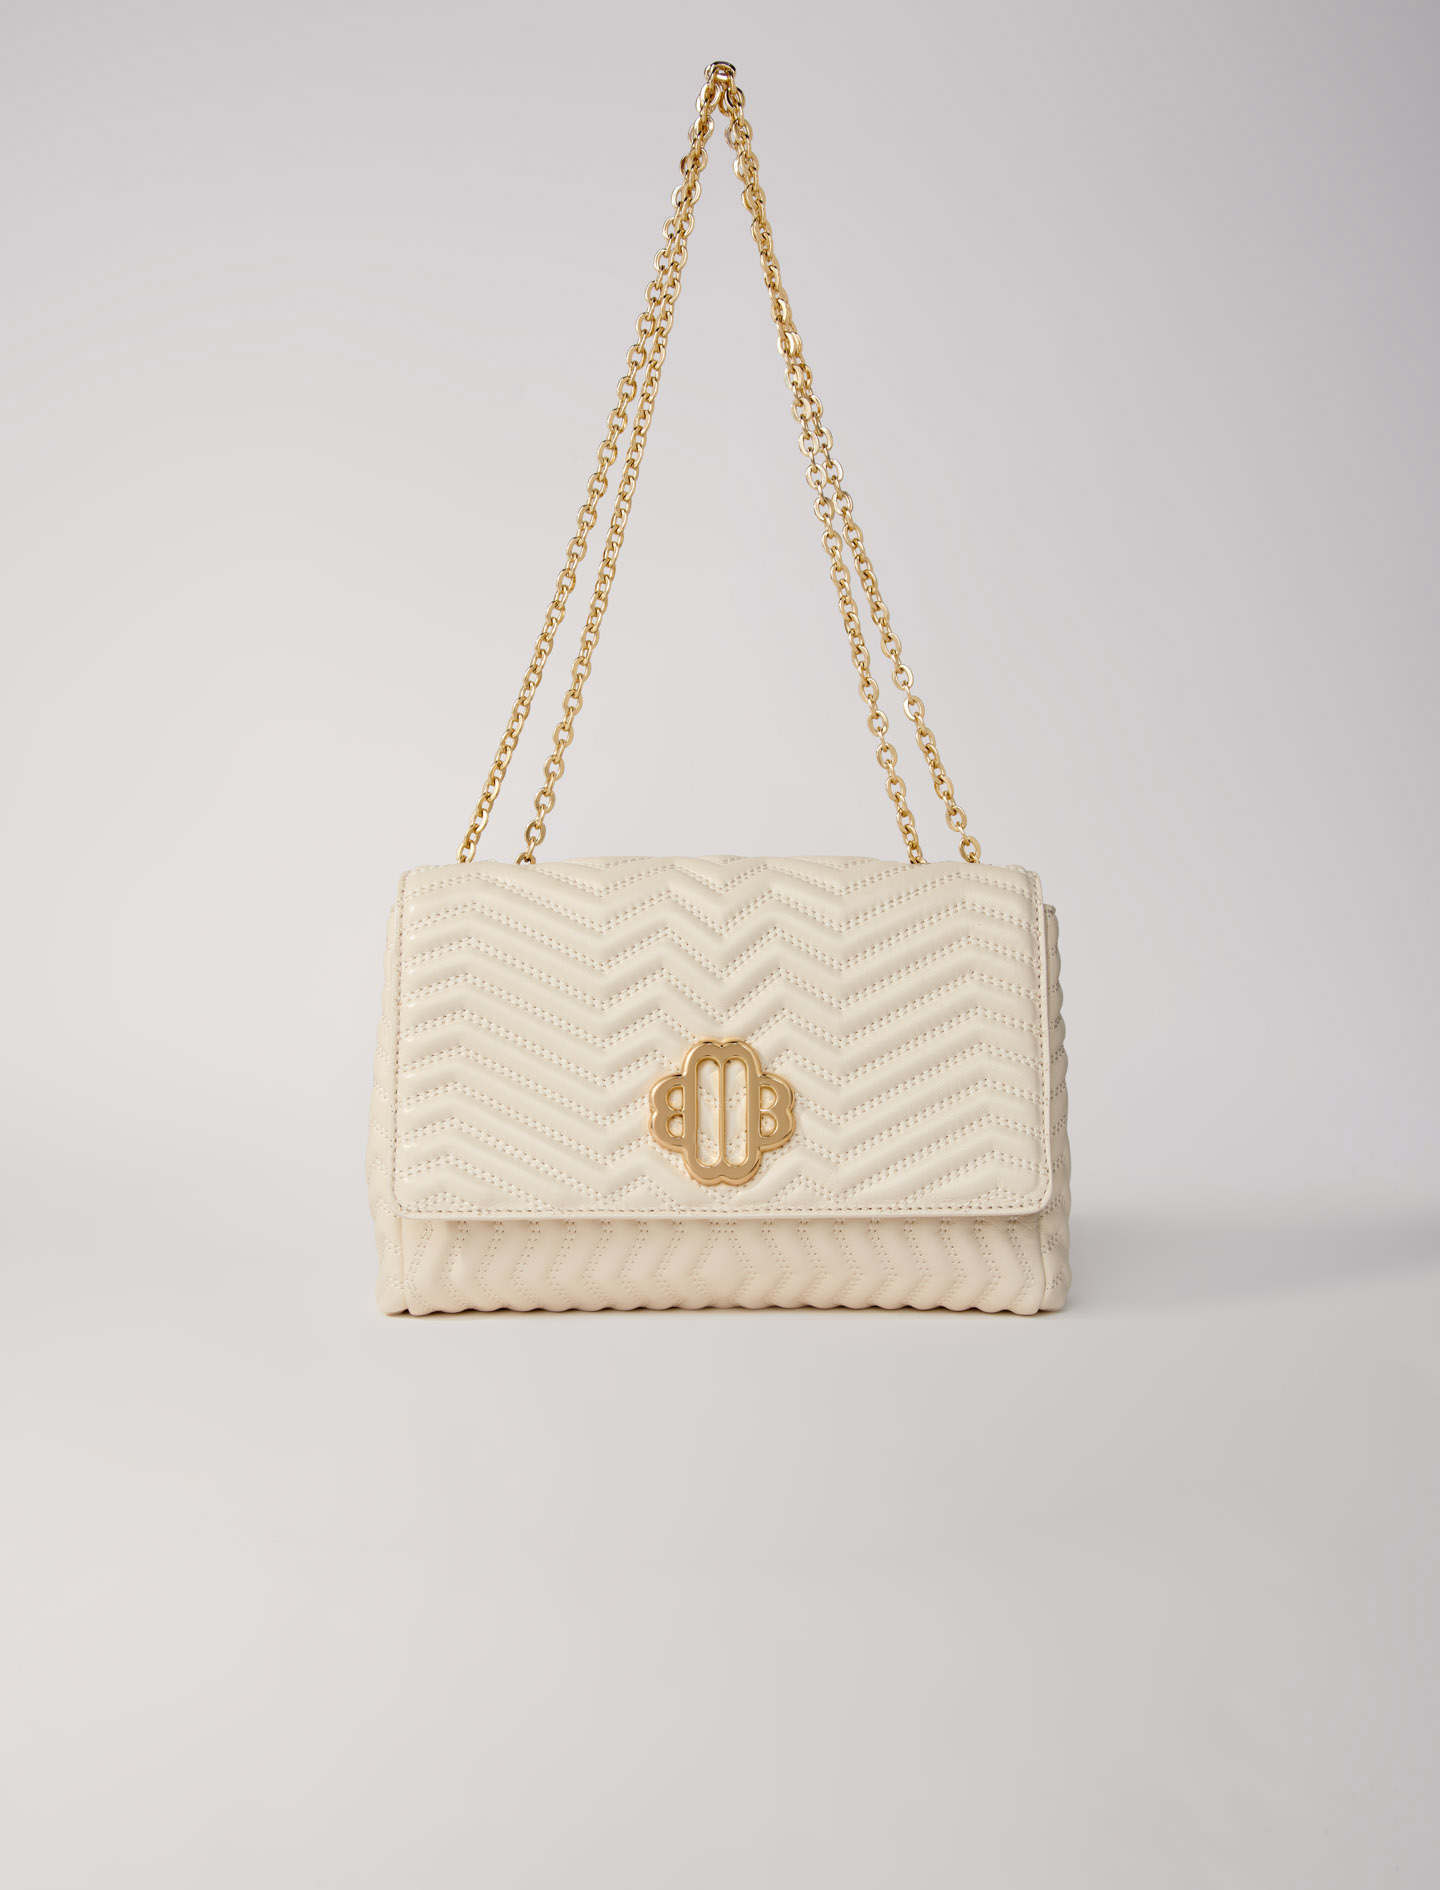 Maje Woman's cotton Coating: Leather bag with chain strap for Spring/Summer, in color Vanilla /